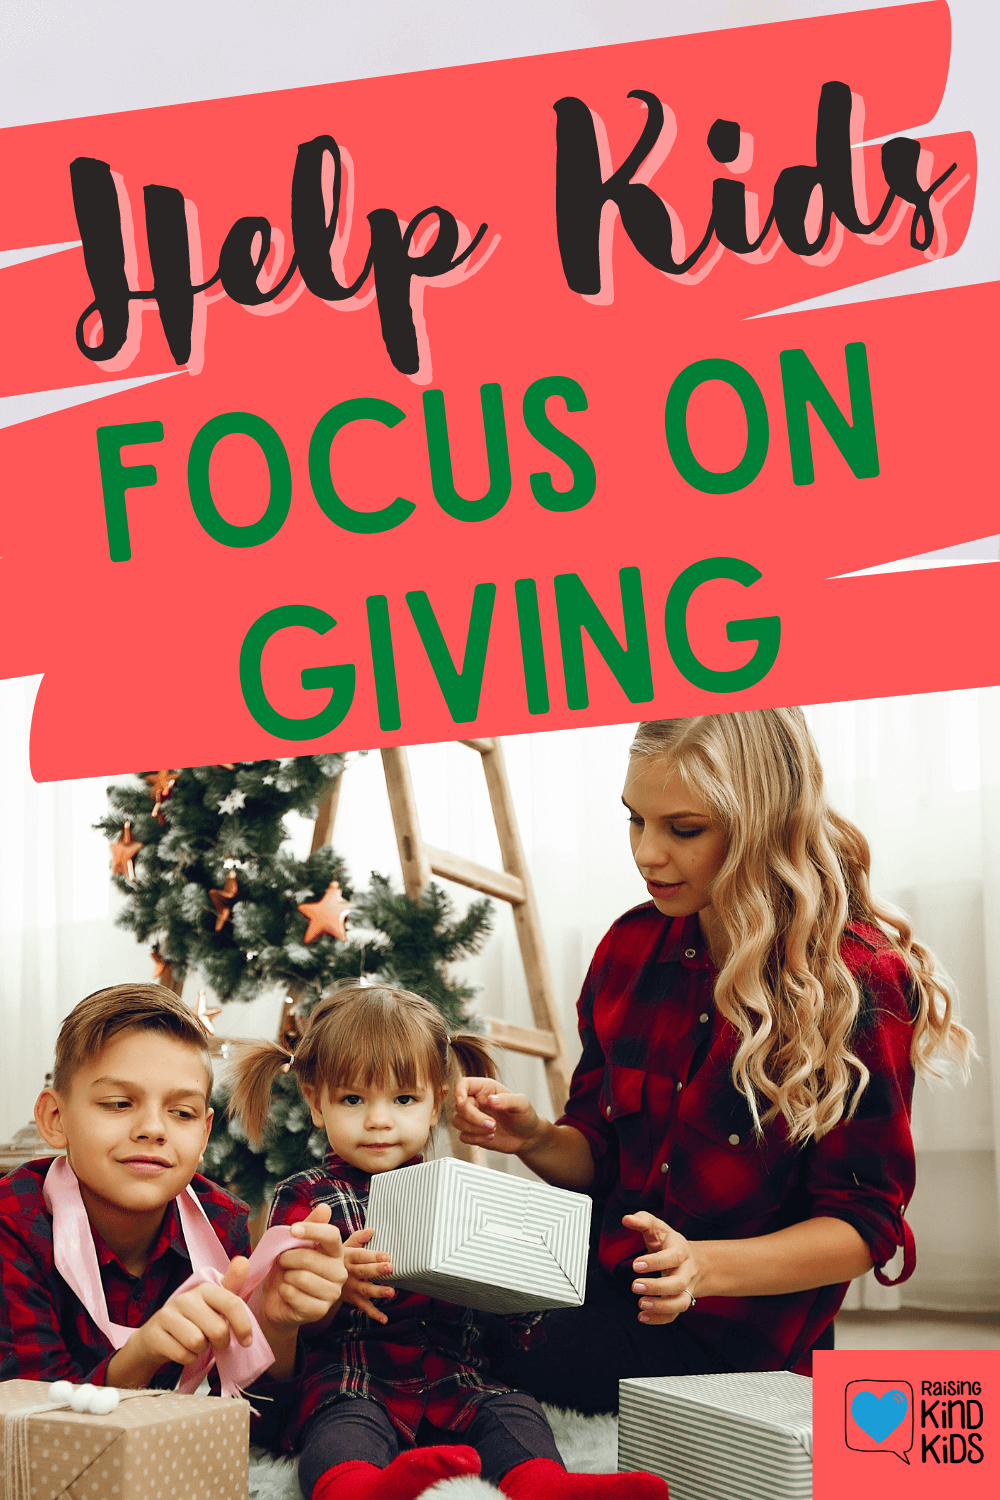 Are you concerned with how much stuff your kids receive on Christmas. Focus on the giving with this one simple trick. www.coffeeandcarpool.com #giving #spiritofChristmas #teachingkidsgratitude #focusongiving